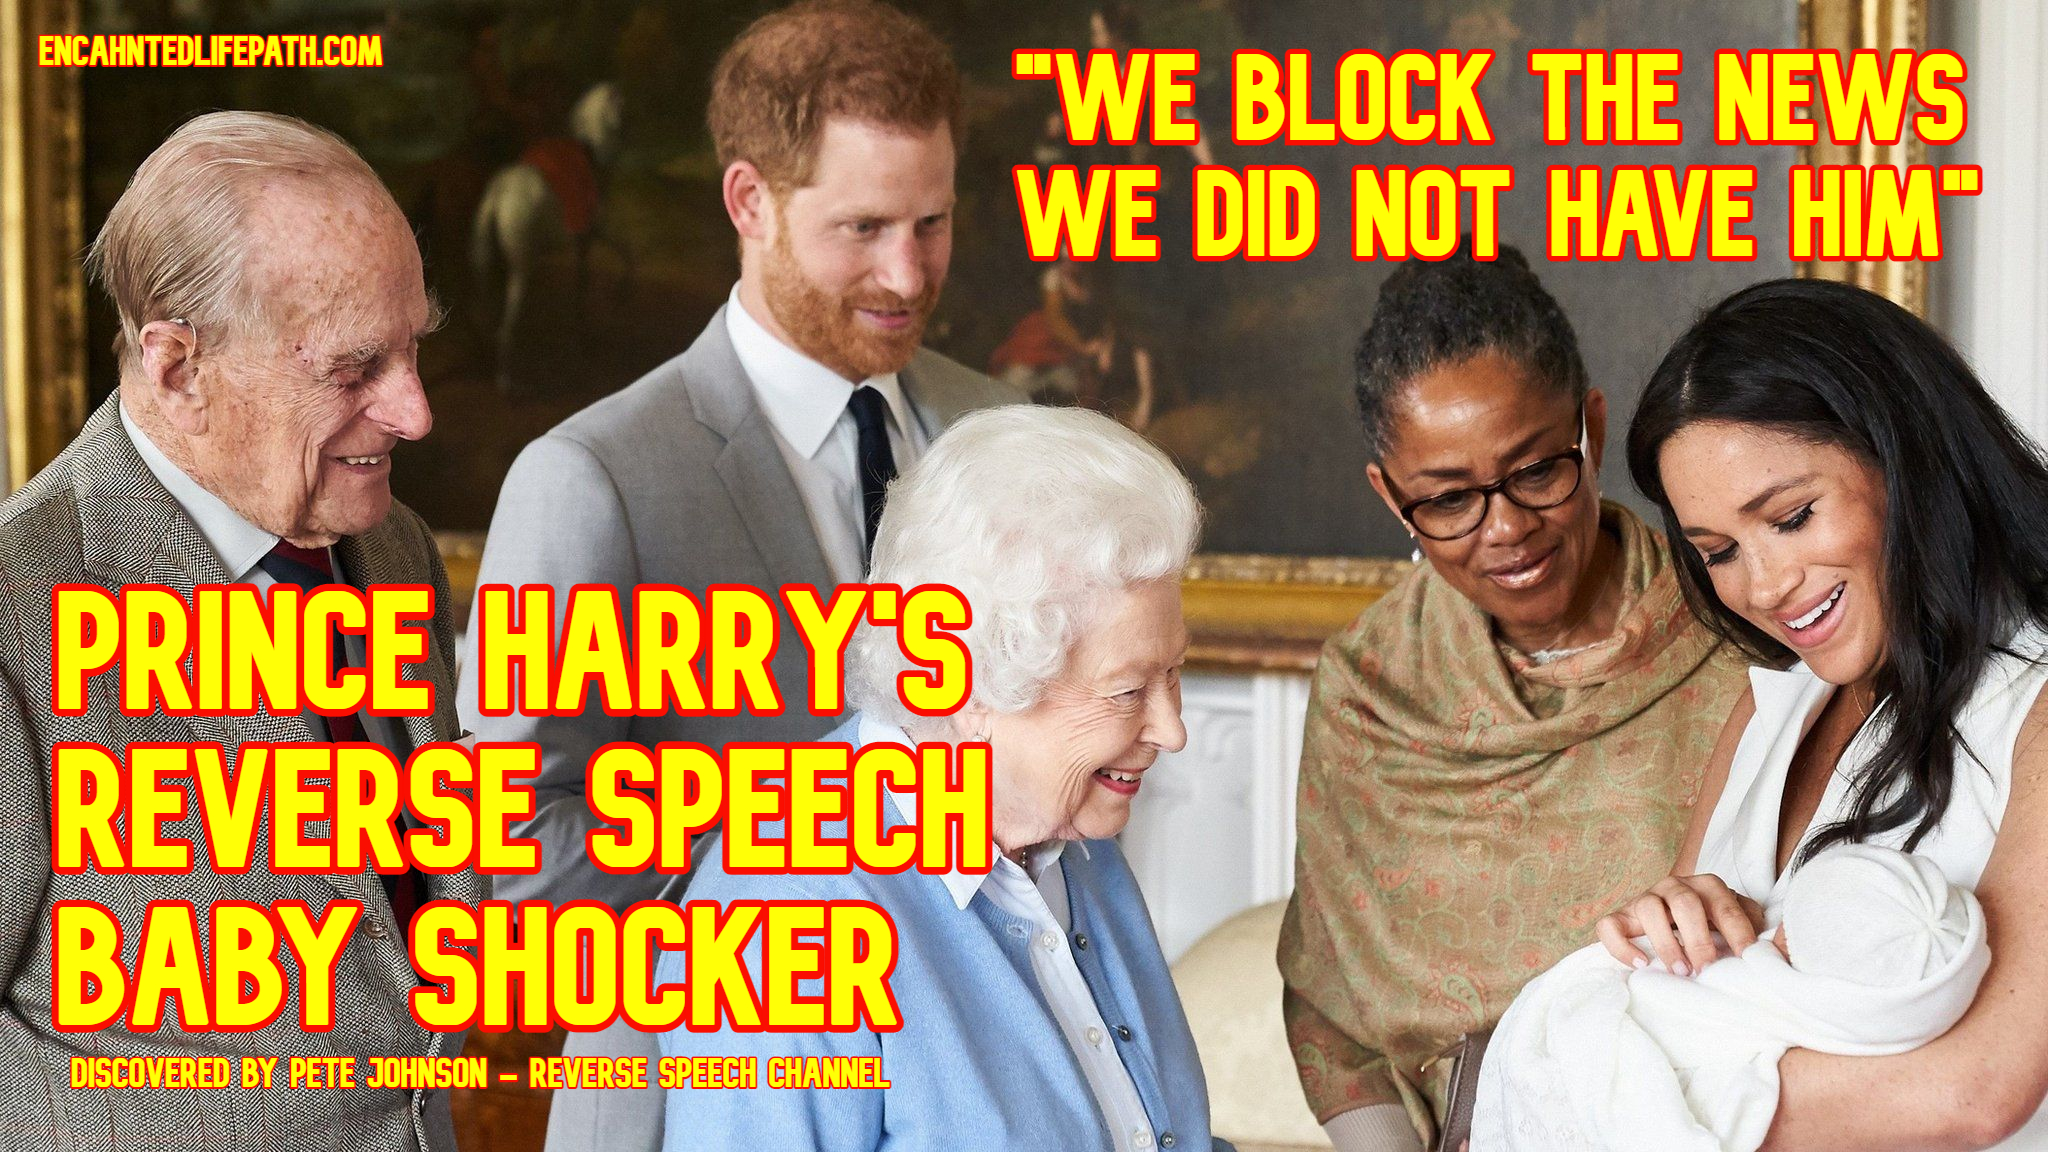 Prince Harry's Reverse Speech - Fake Royal Baby Archie Harrison - See More From Pete Johnson On Enchanted LifePath Website